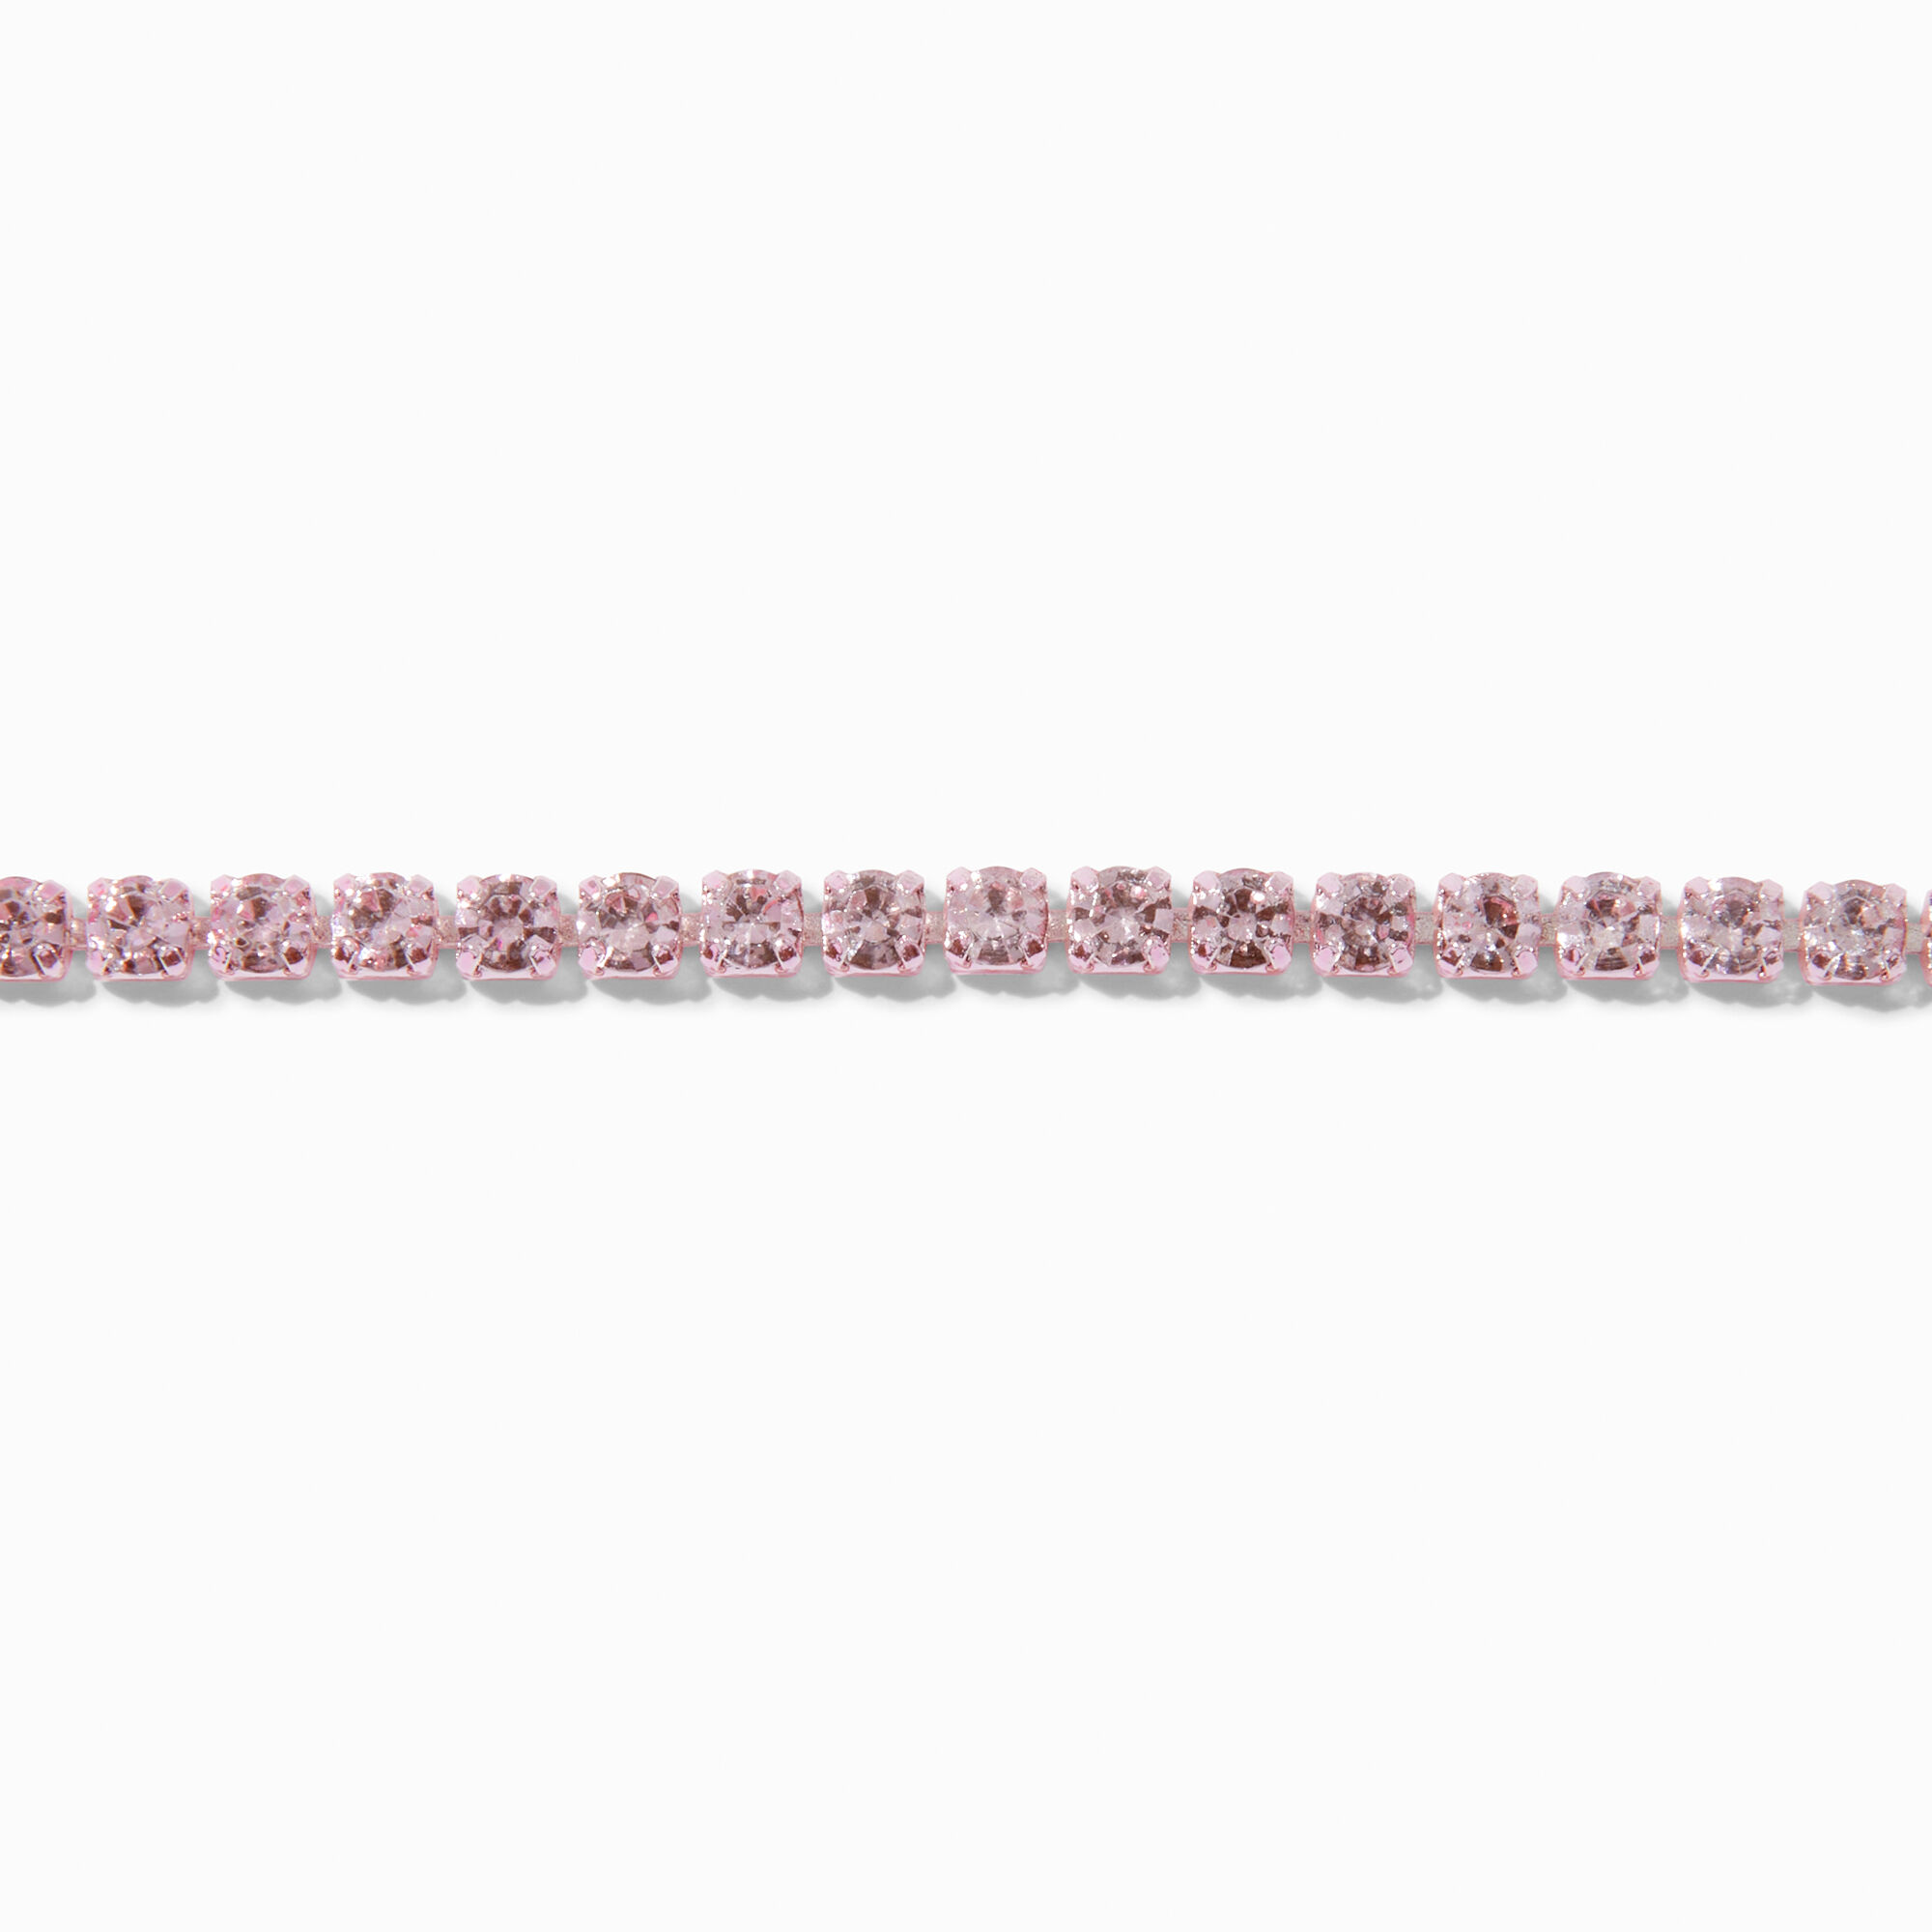 View Claires Crystal Cupchain Choker Necklace Pink information